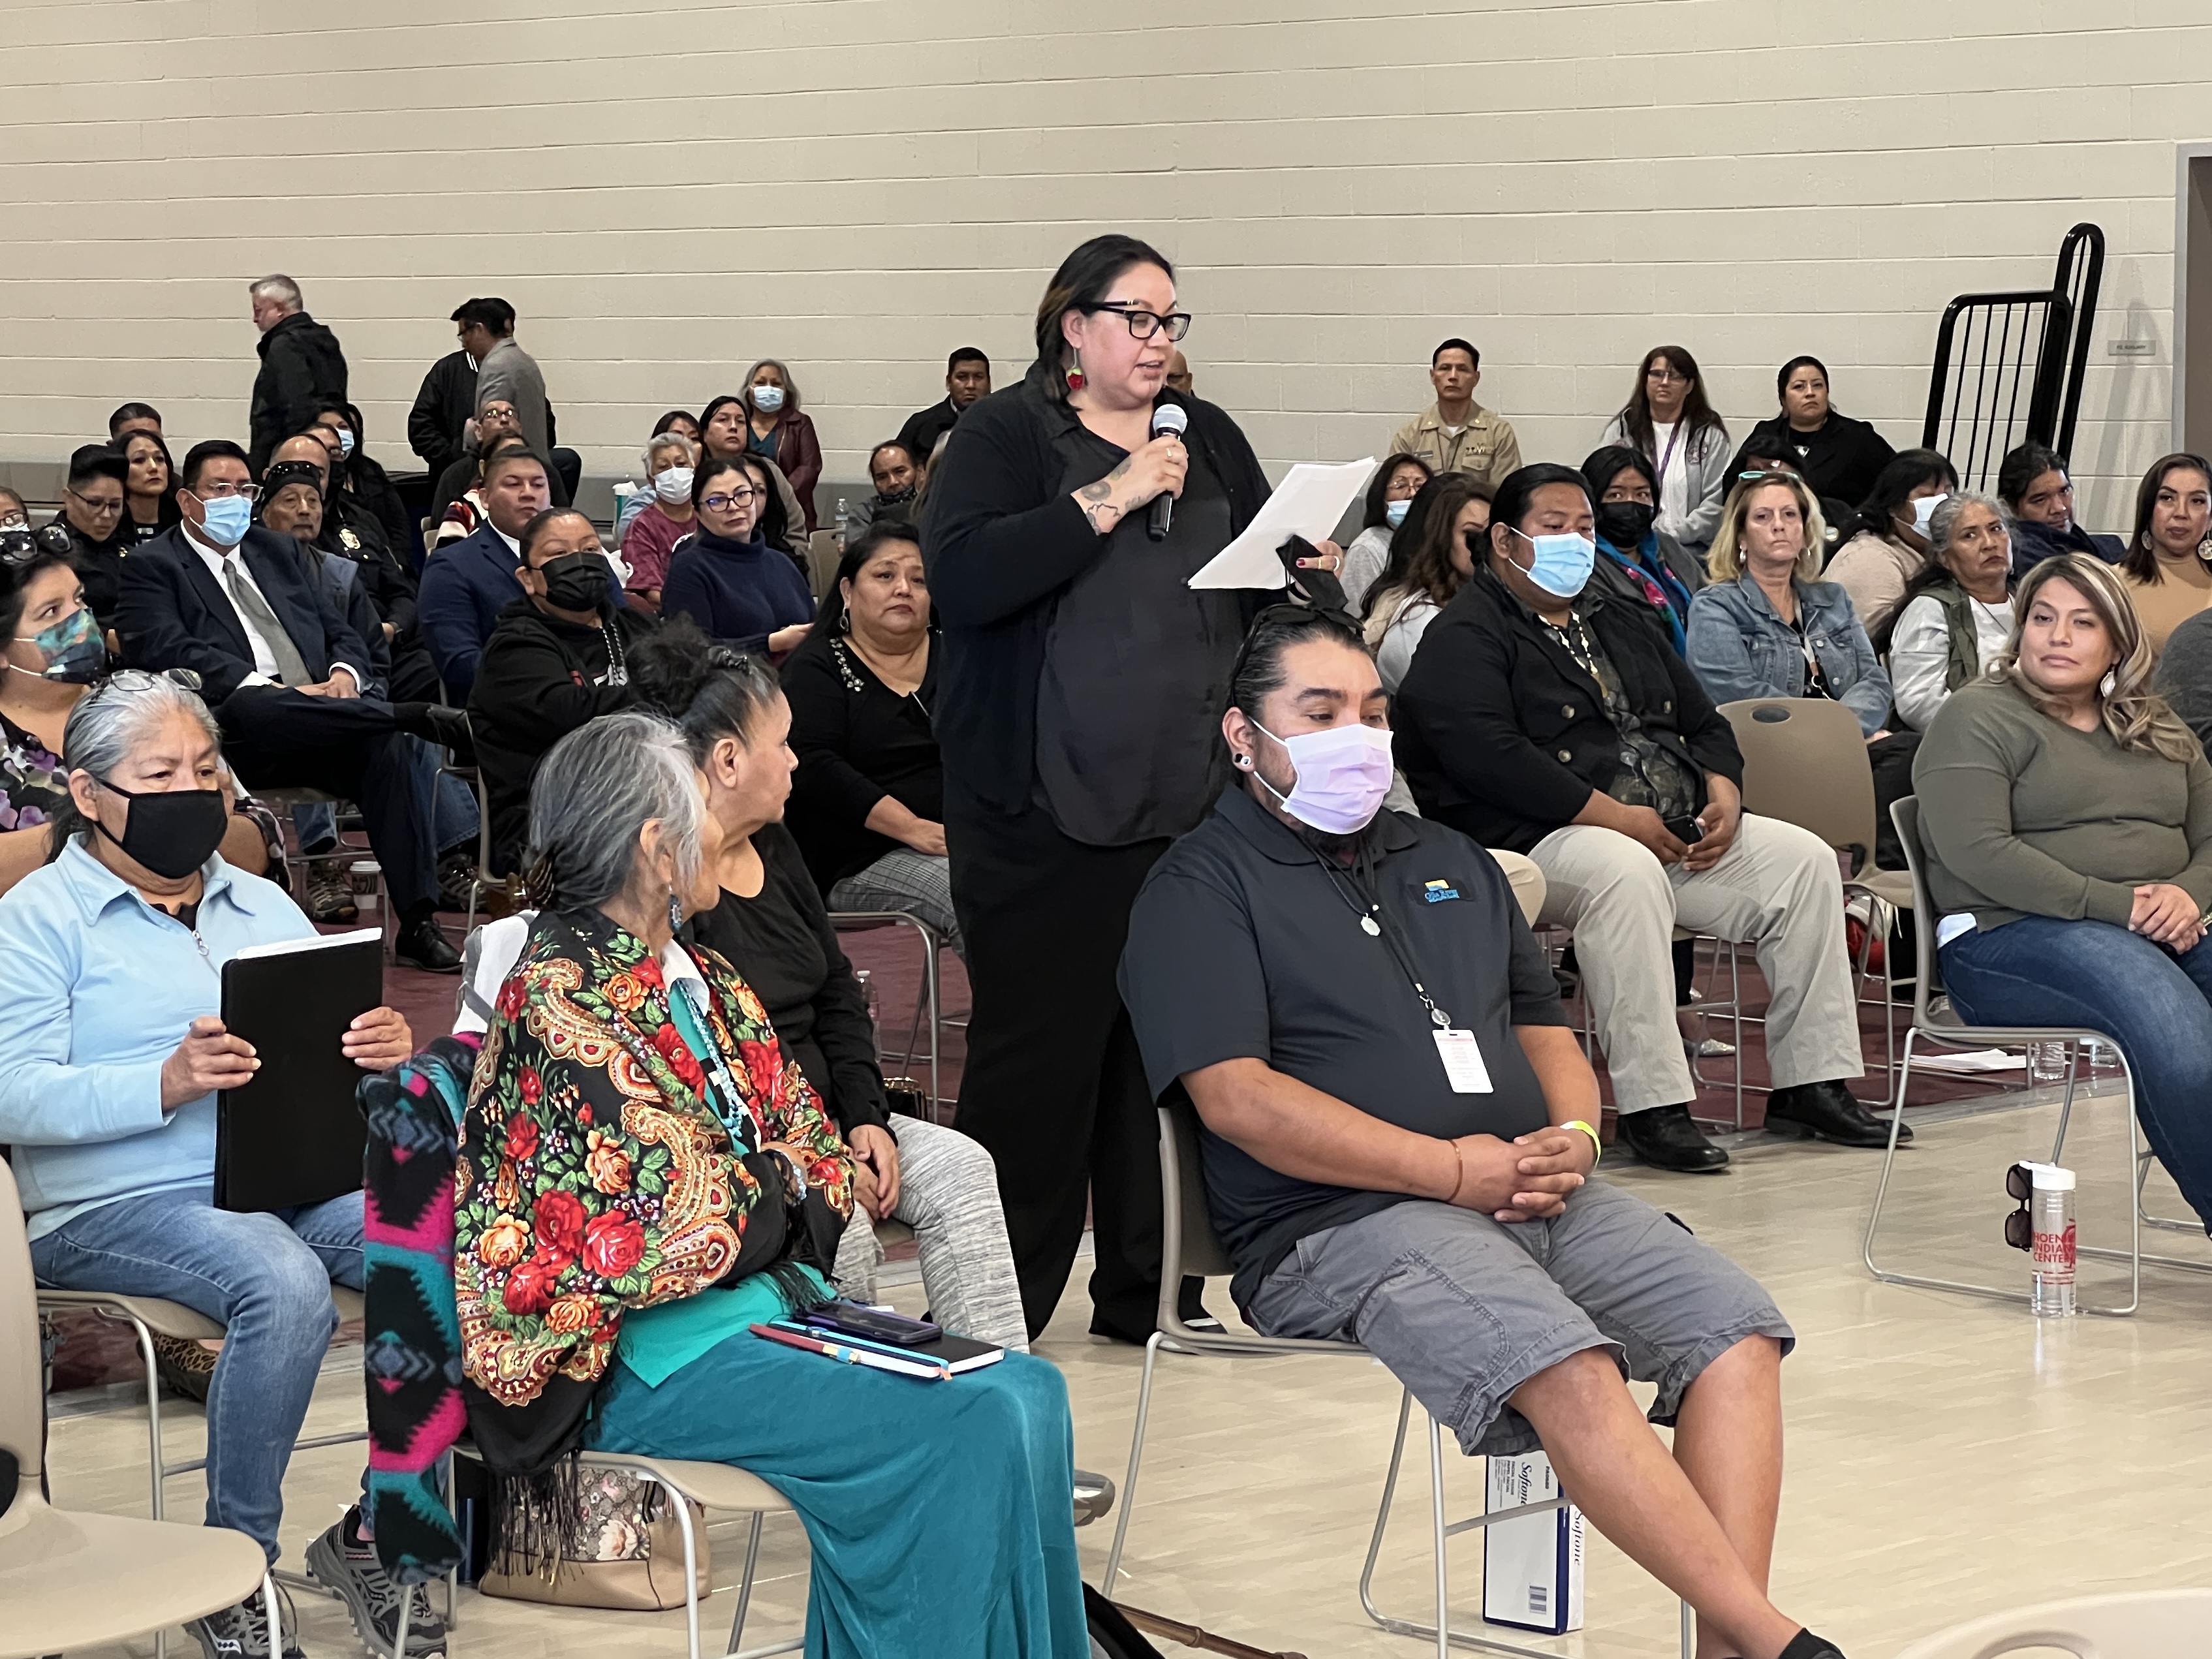 Tribal citizens and boarding school survivors filled the Gila Crossing Community School near Phoenix on Friday, as senior officials from the Department of Interior held the fourth listening session on the yearlong Road to Healing Tour. Photo by Department of the Interior/Flickr